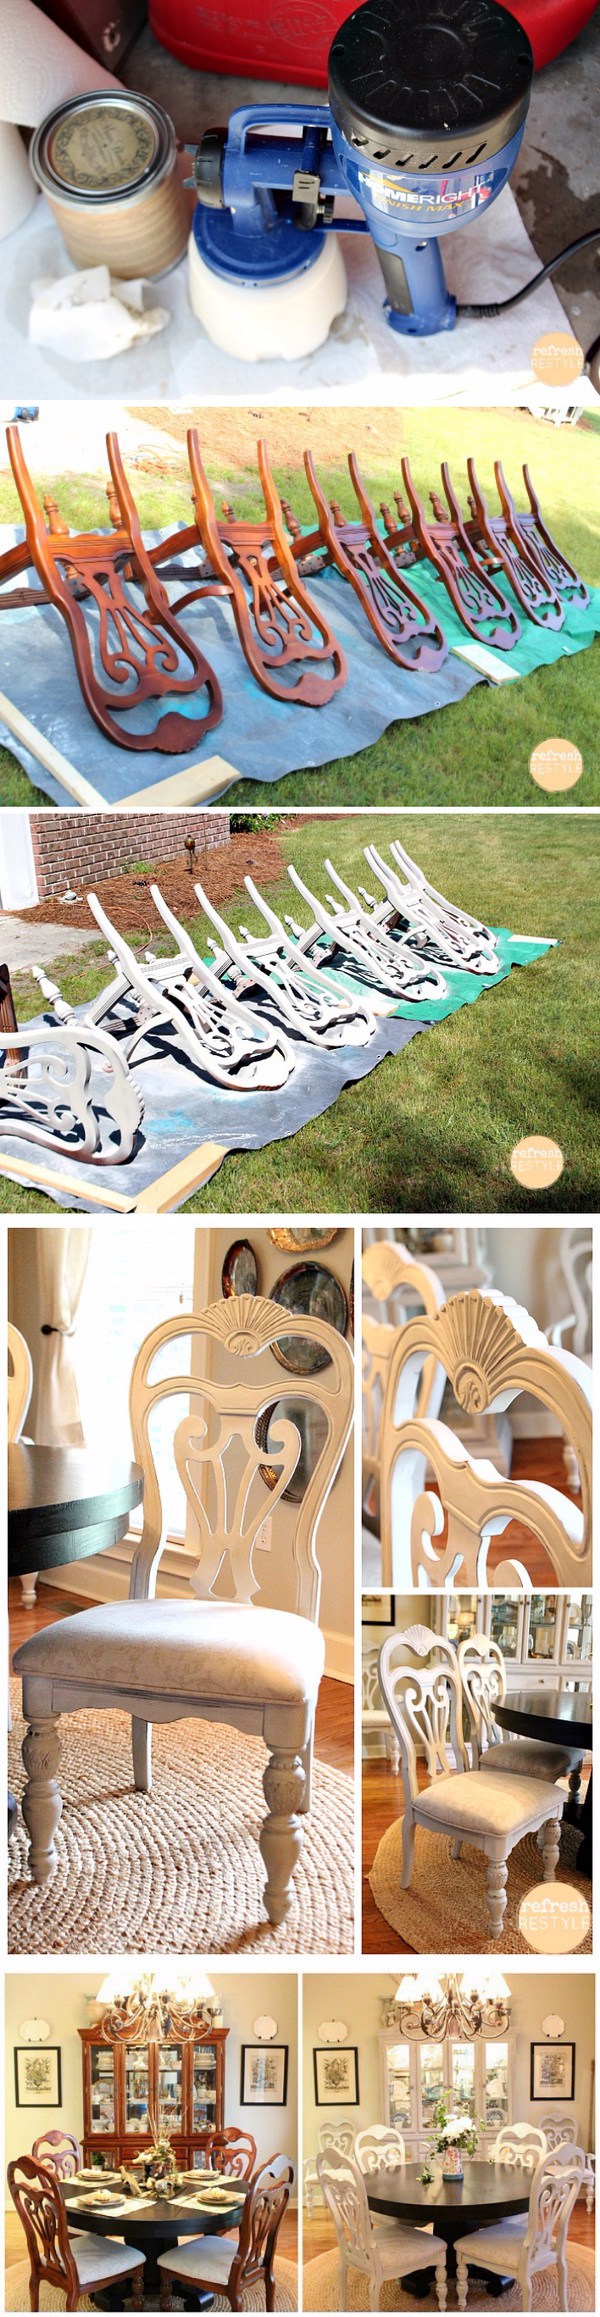 Spray Painted Dining Chairs. Spray paint furniture makeover. Turn the old ugly dining chairs into these gorgeous ones with chalk based paint! It is super easy to do with a bit of handiwork and creativity! 